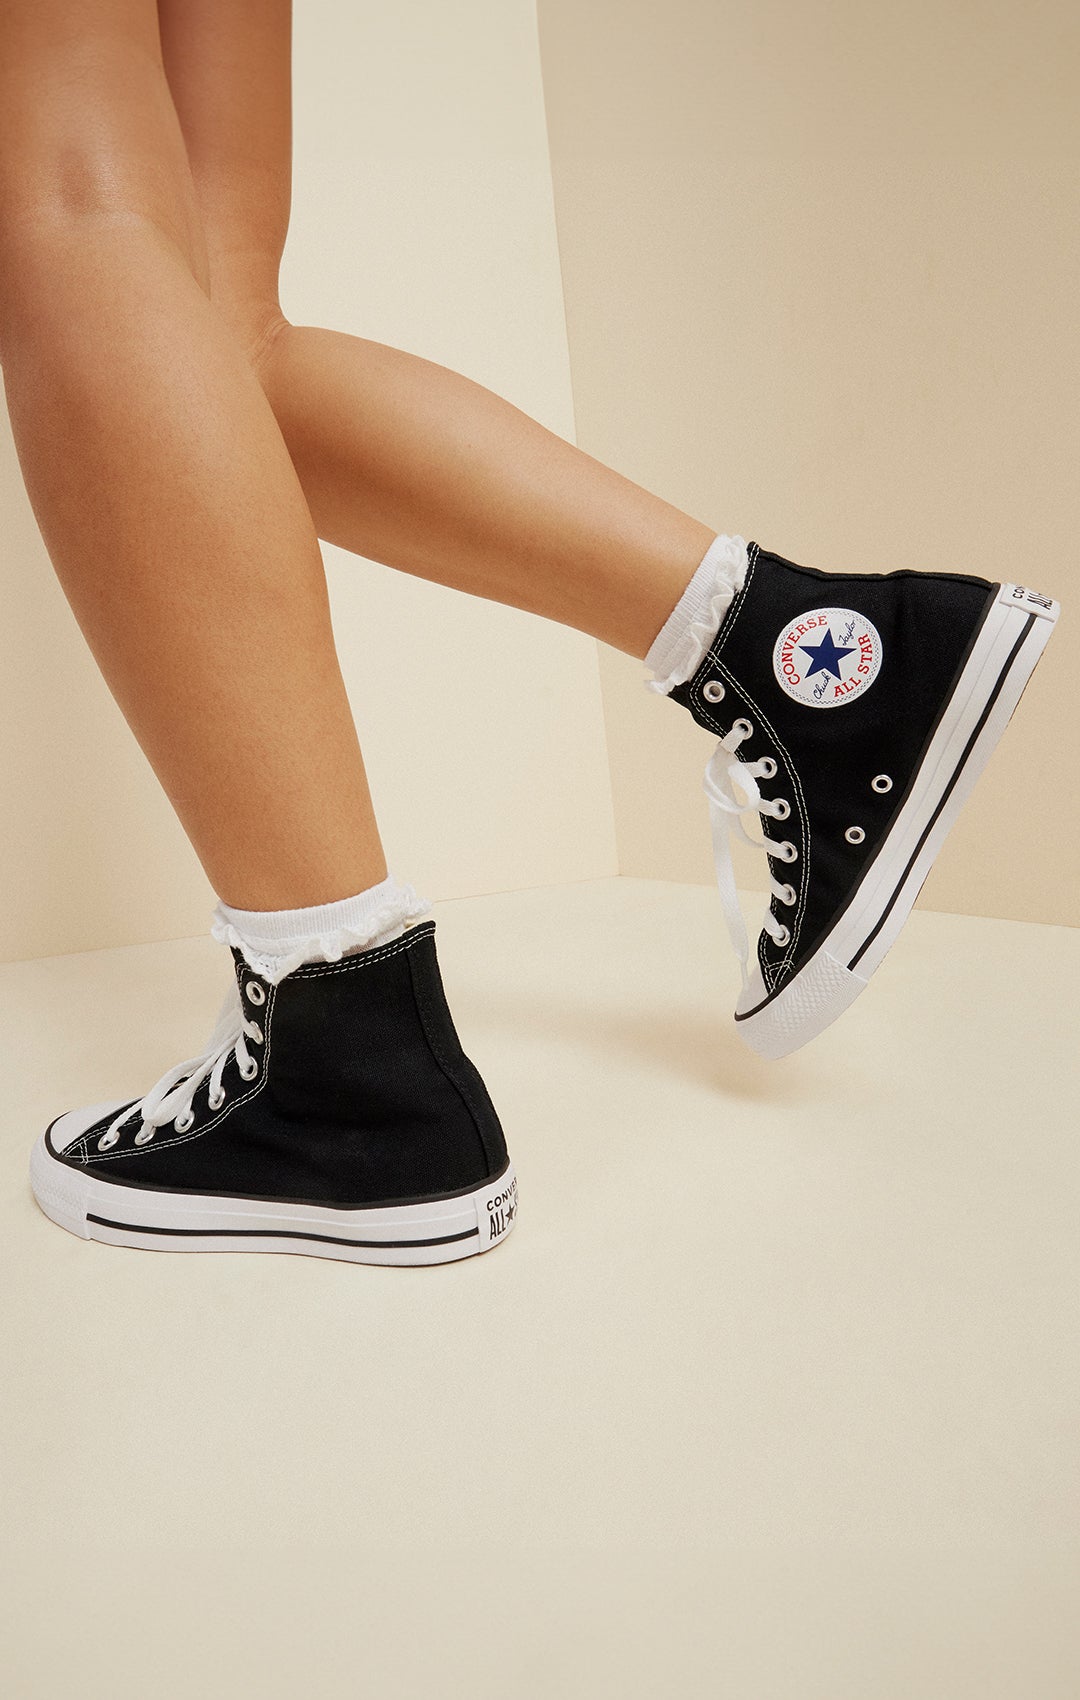 Converse Chuck Taylor All Star Terrain Shoes Sneakers | Upper Canada Mall